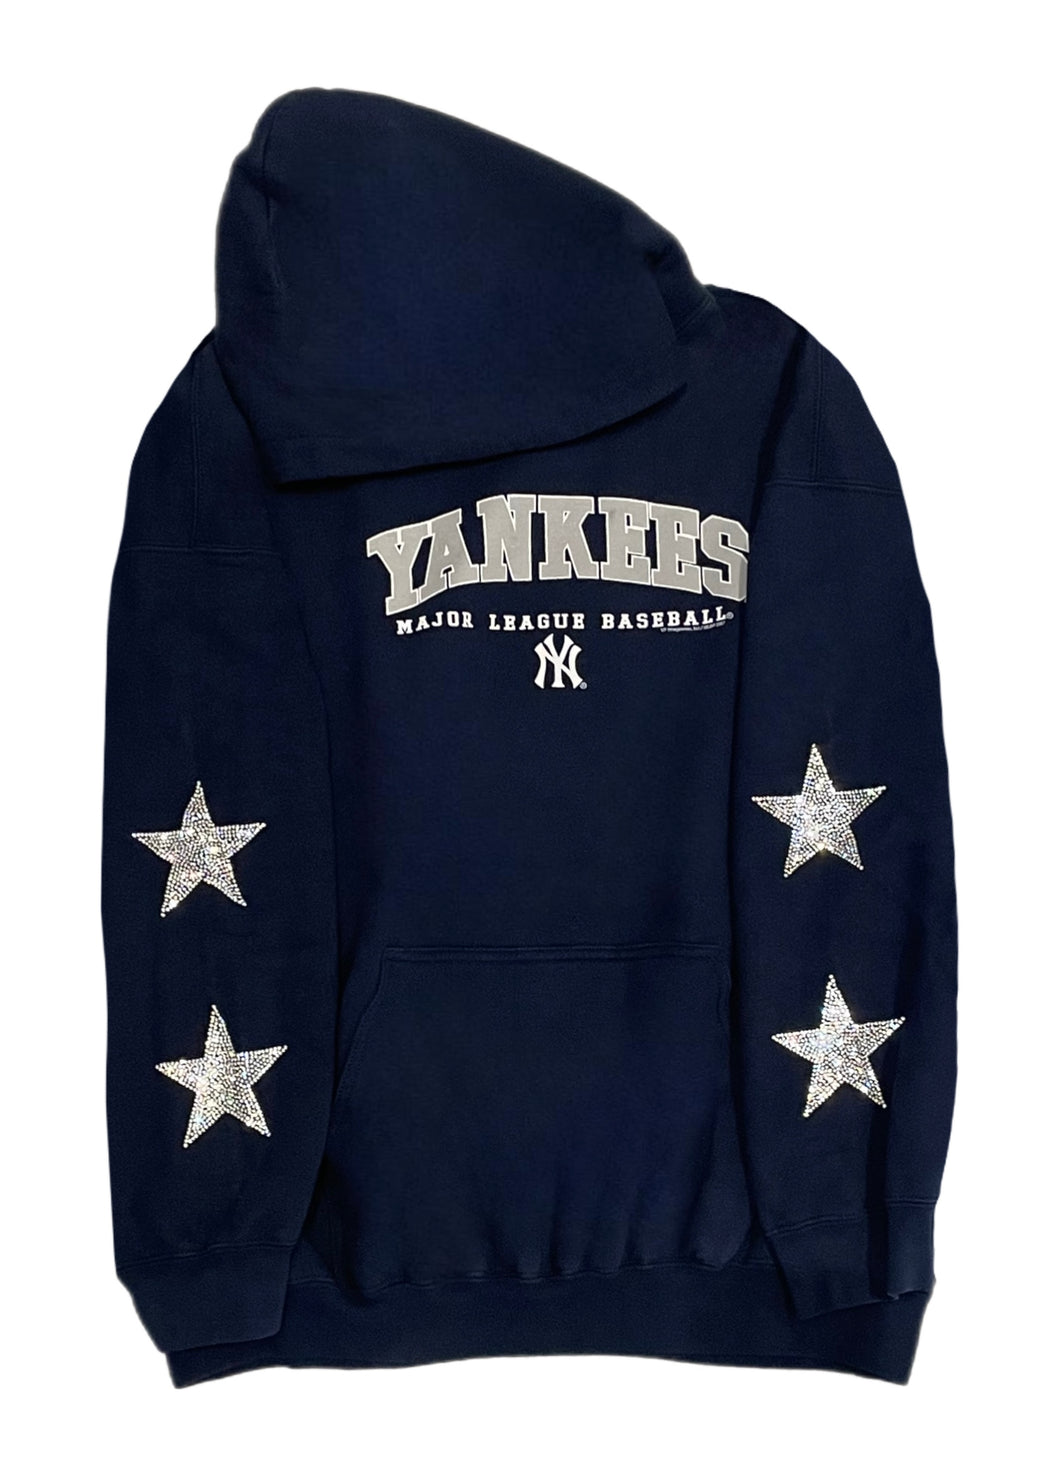 NY Yankees, MLB One of a KIND Vintage Hoodie with Crystal Star Design